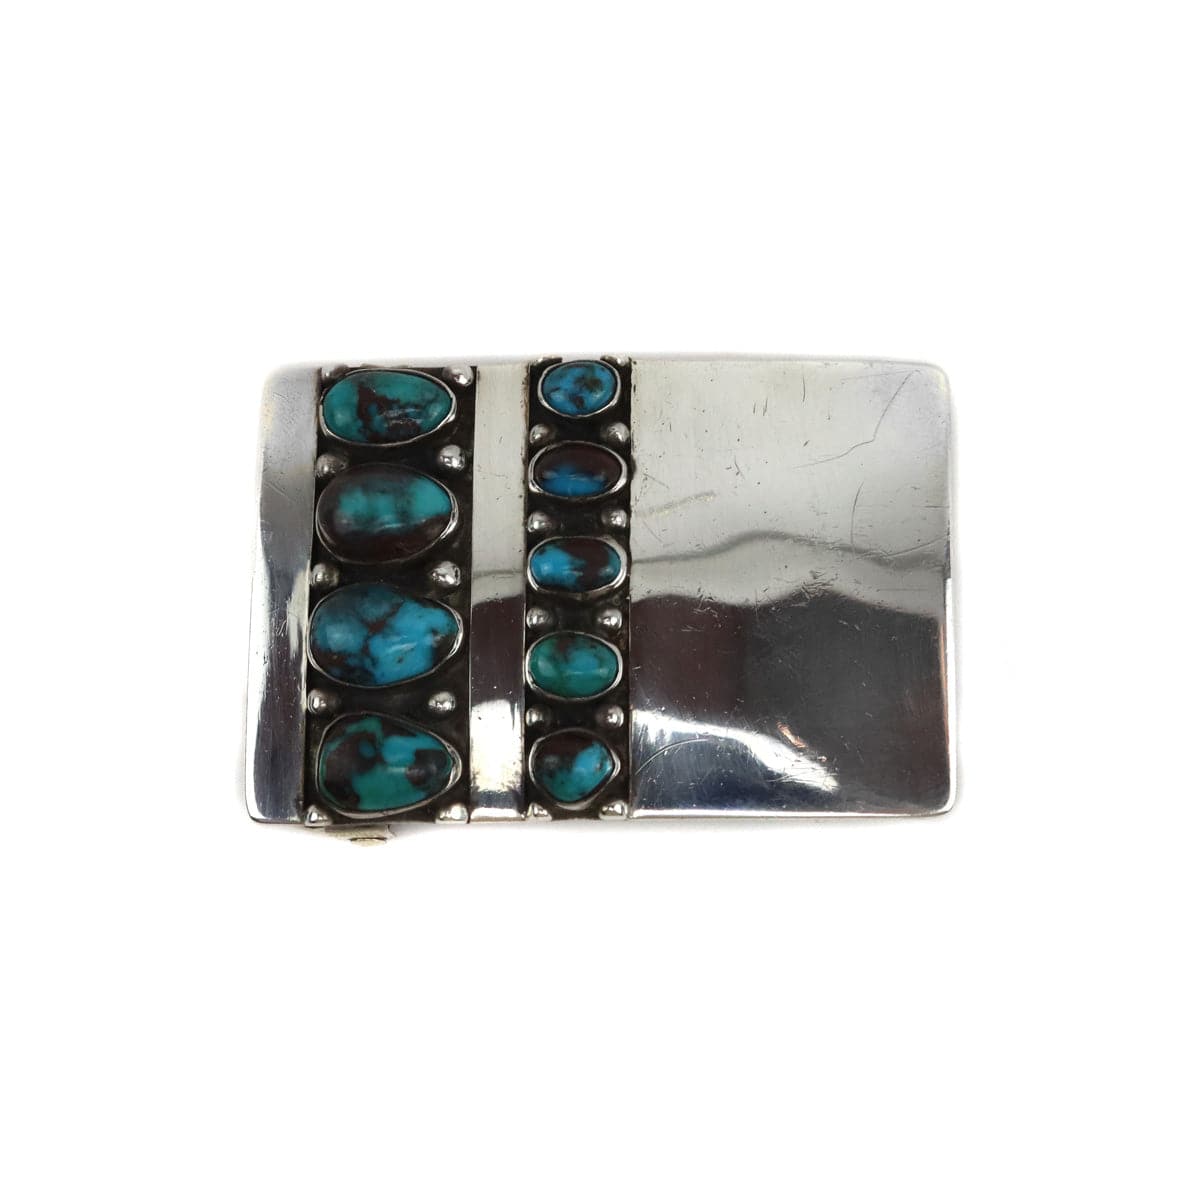 John G. Begay and White Hogan Shop - Navajo Bisbee Turquoise and Sterling Silver Belt Buckle c. 1970s, 2" x 3" (J15551)